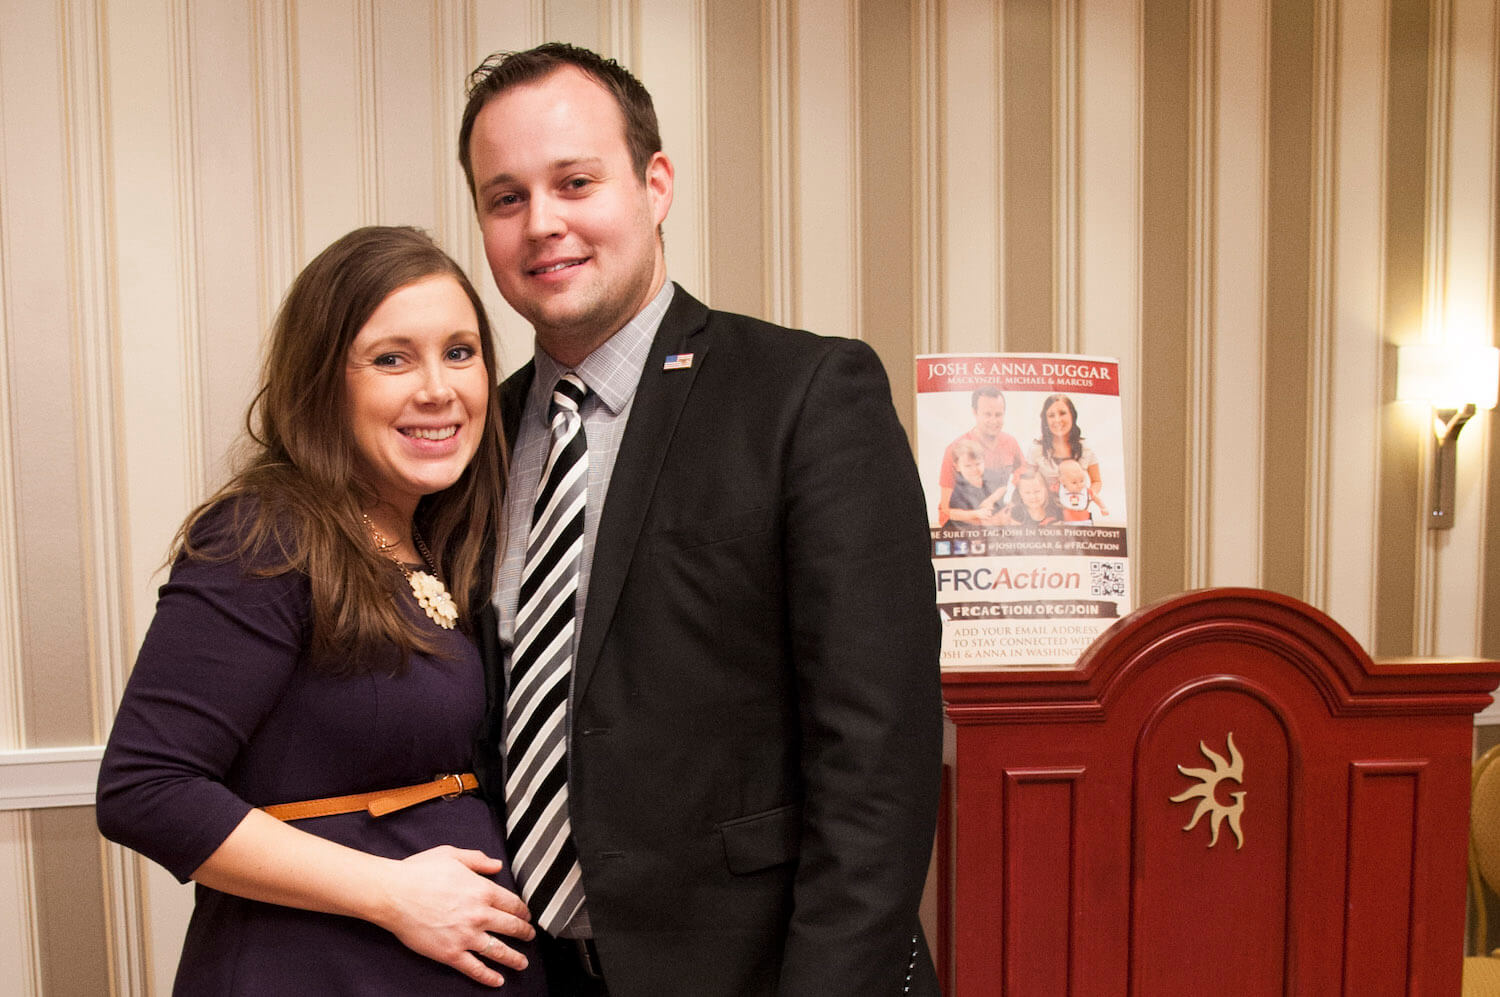 Josh and Anna Duggar of the Duggar family standing next to each other and smiling